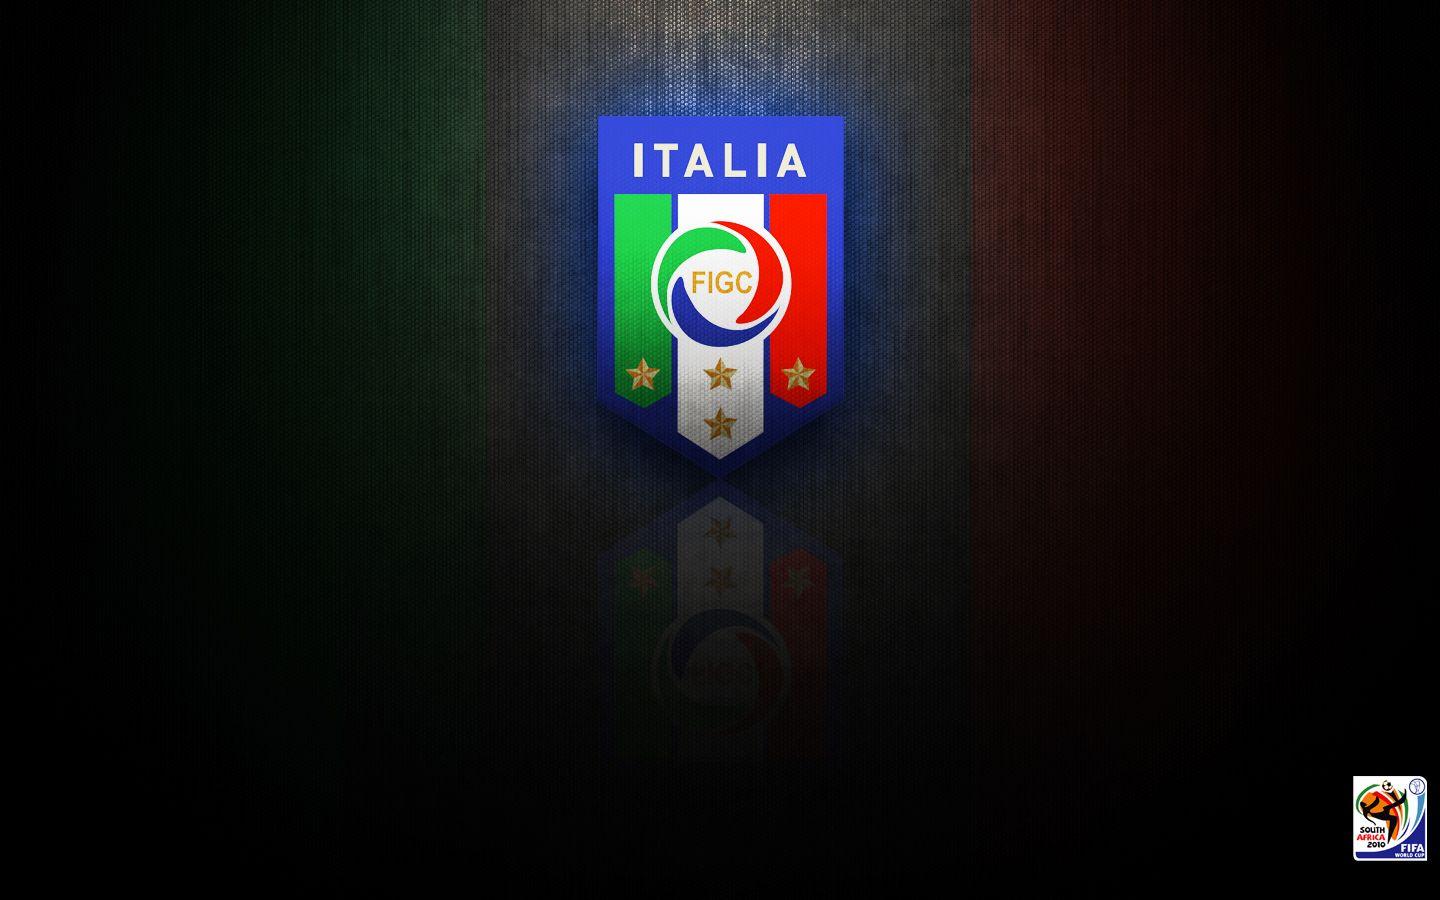 Italy 2010 World Cup Wallpaper